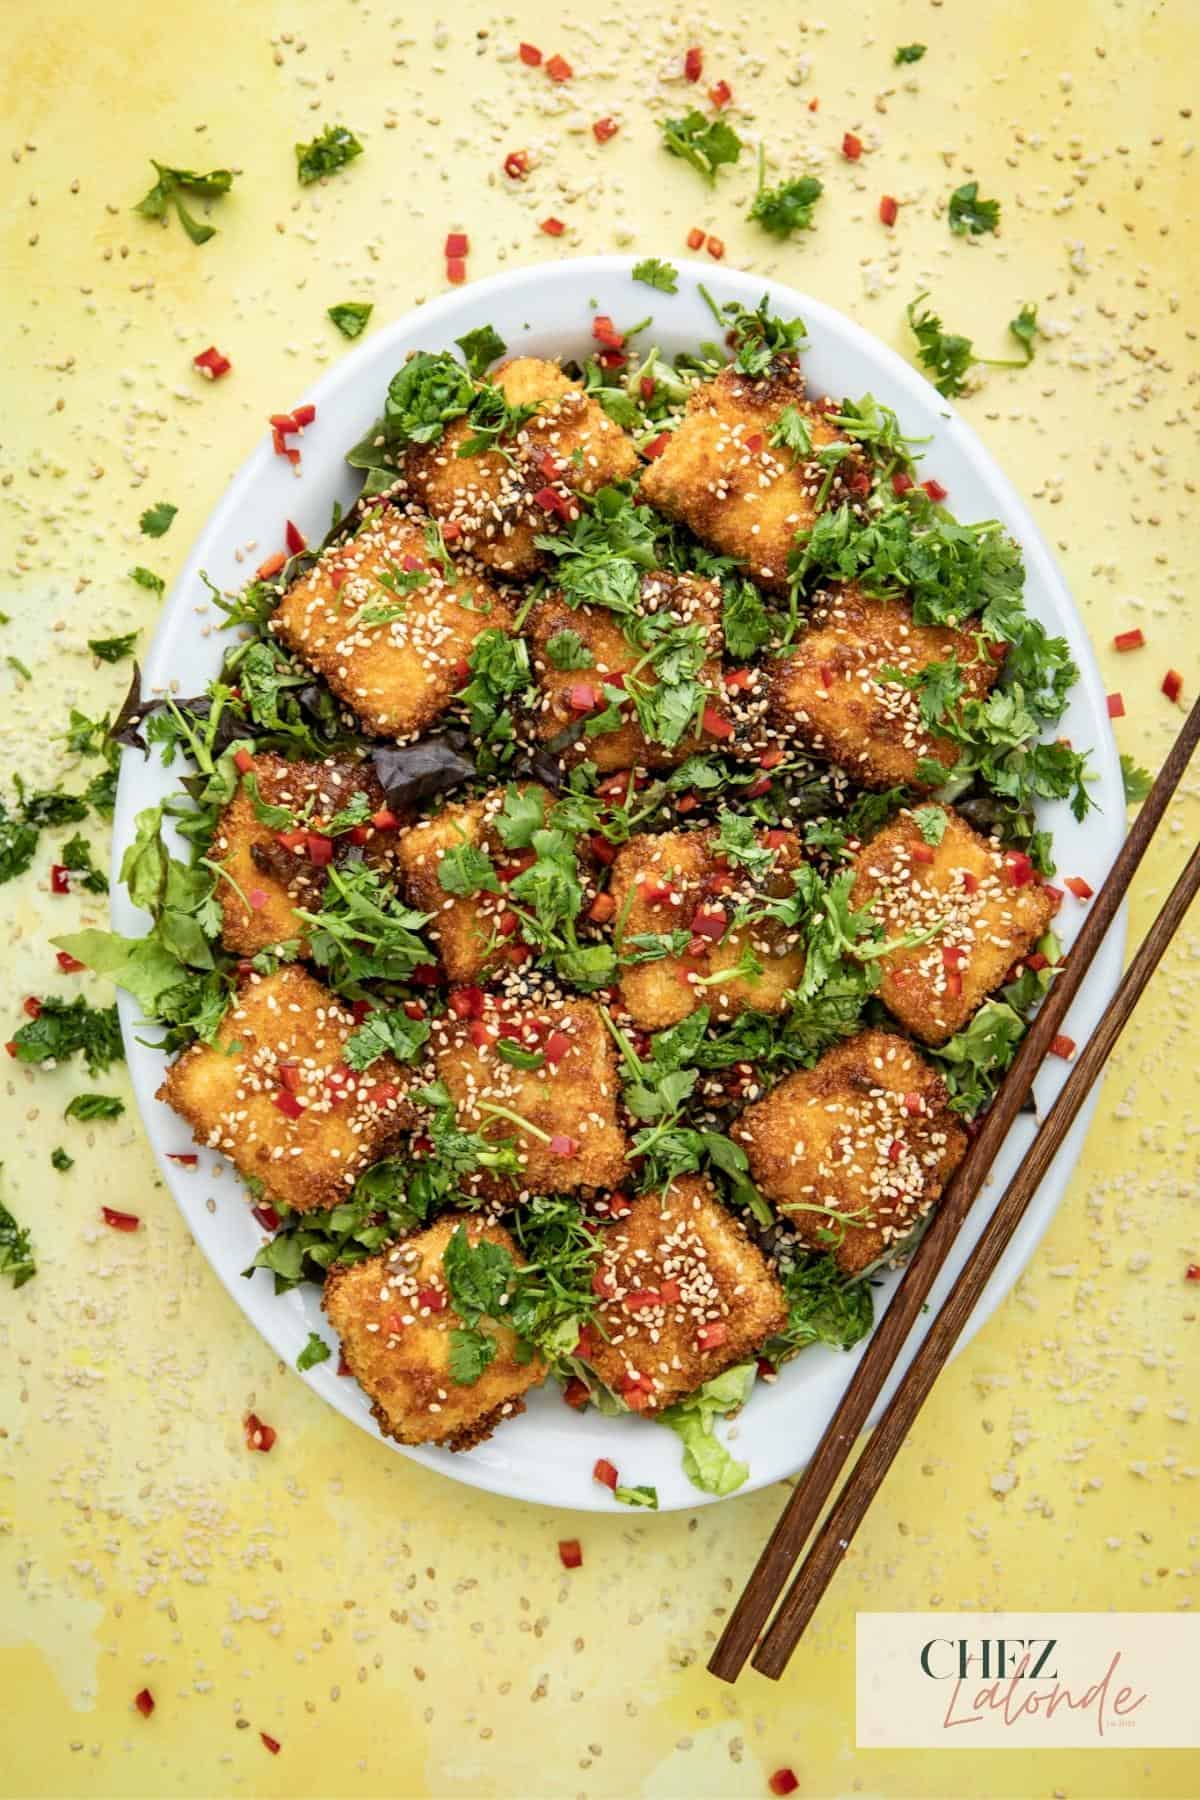 Feature image of A plate of crispy air fryer tofu with panko and drizzled in Asian garlic sauce. Tofu are on a bed of shredded lettuce.